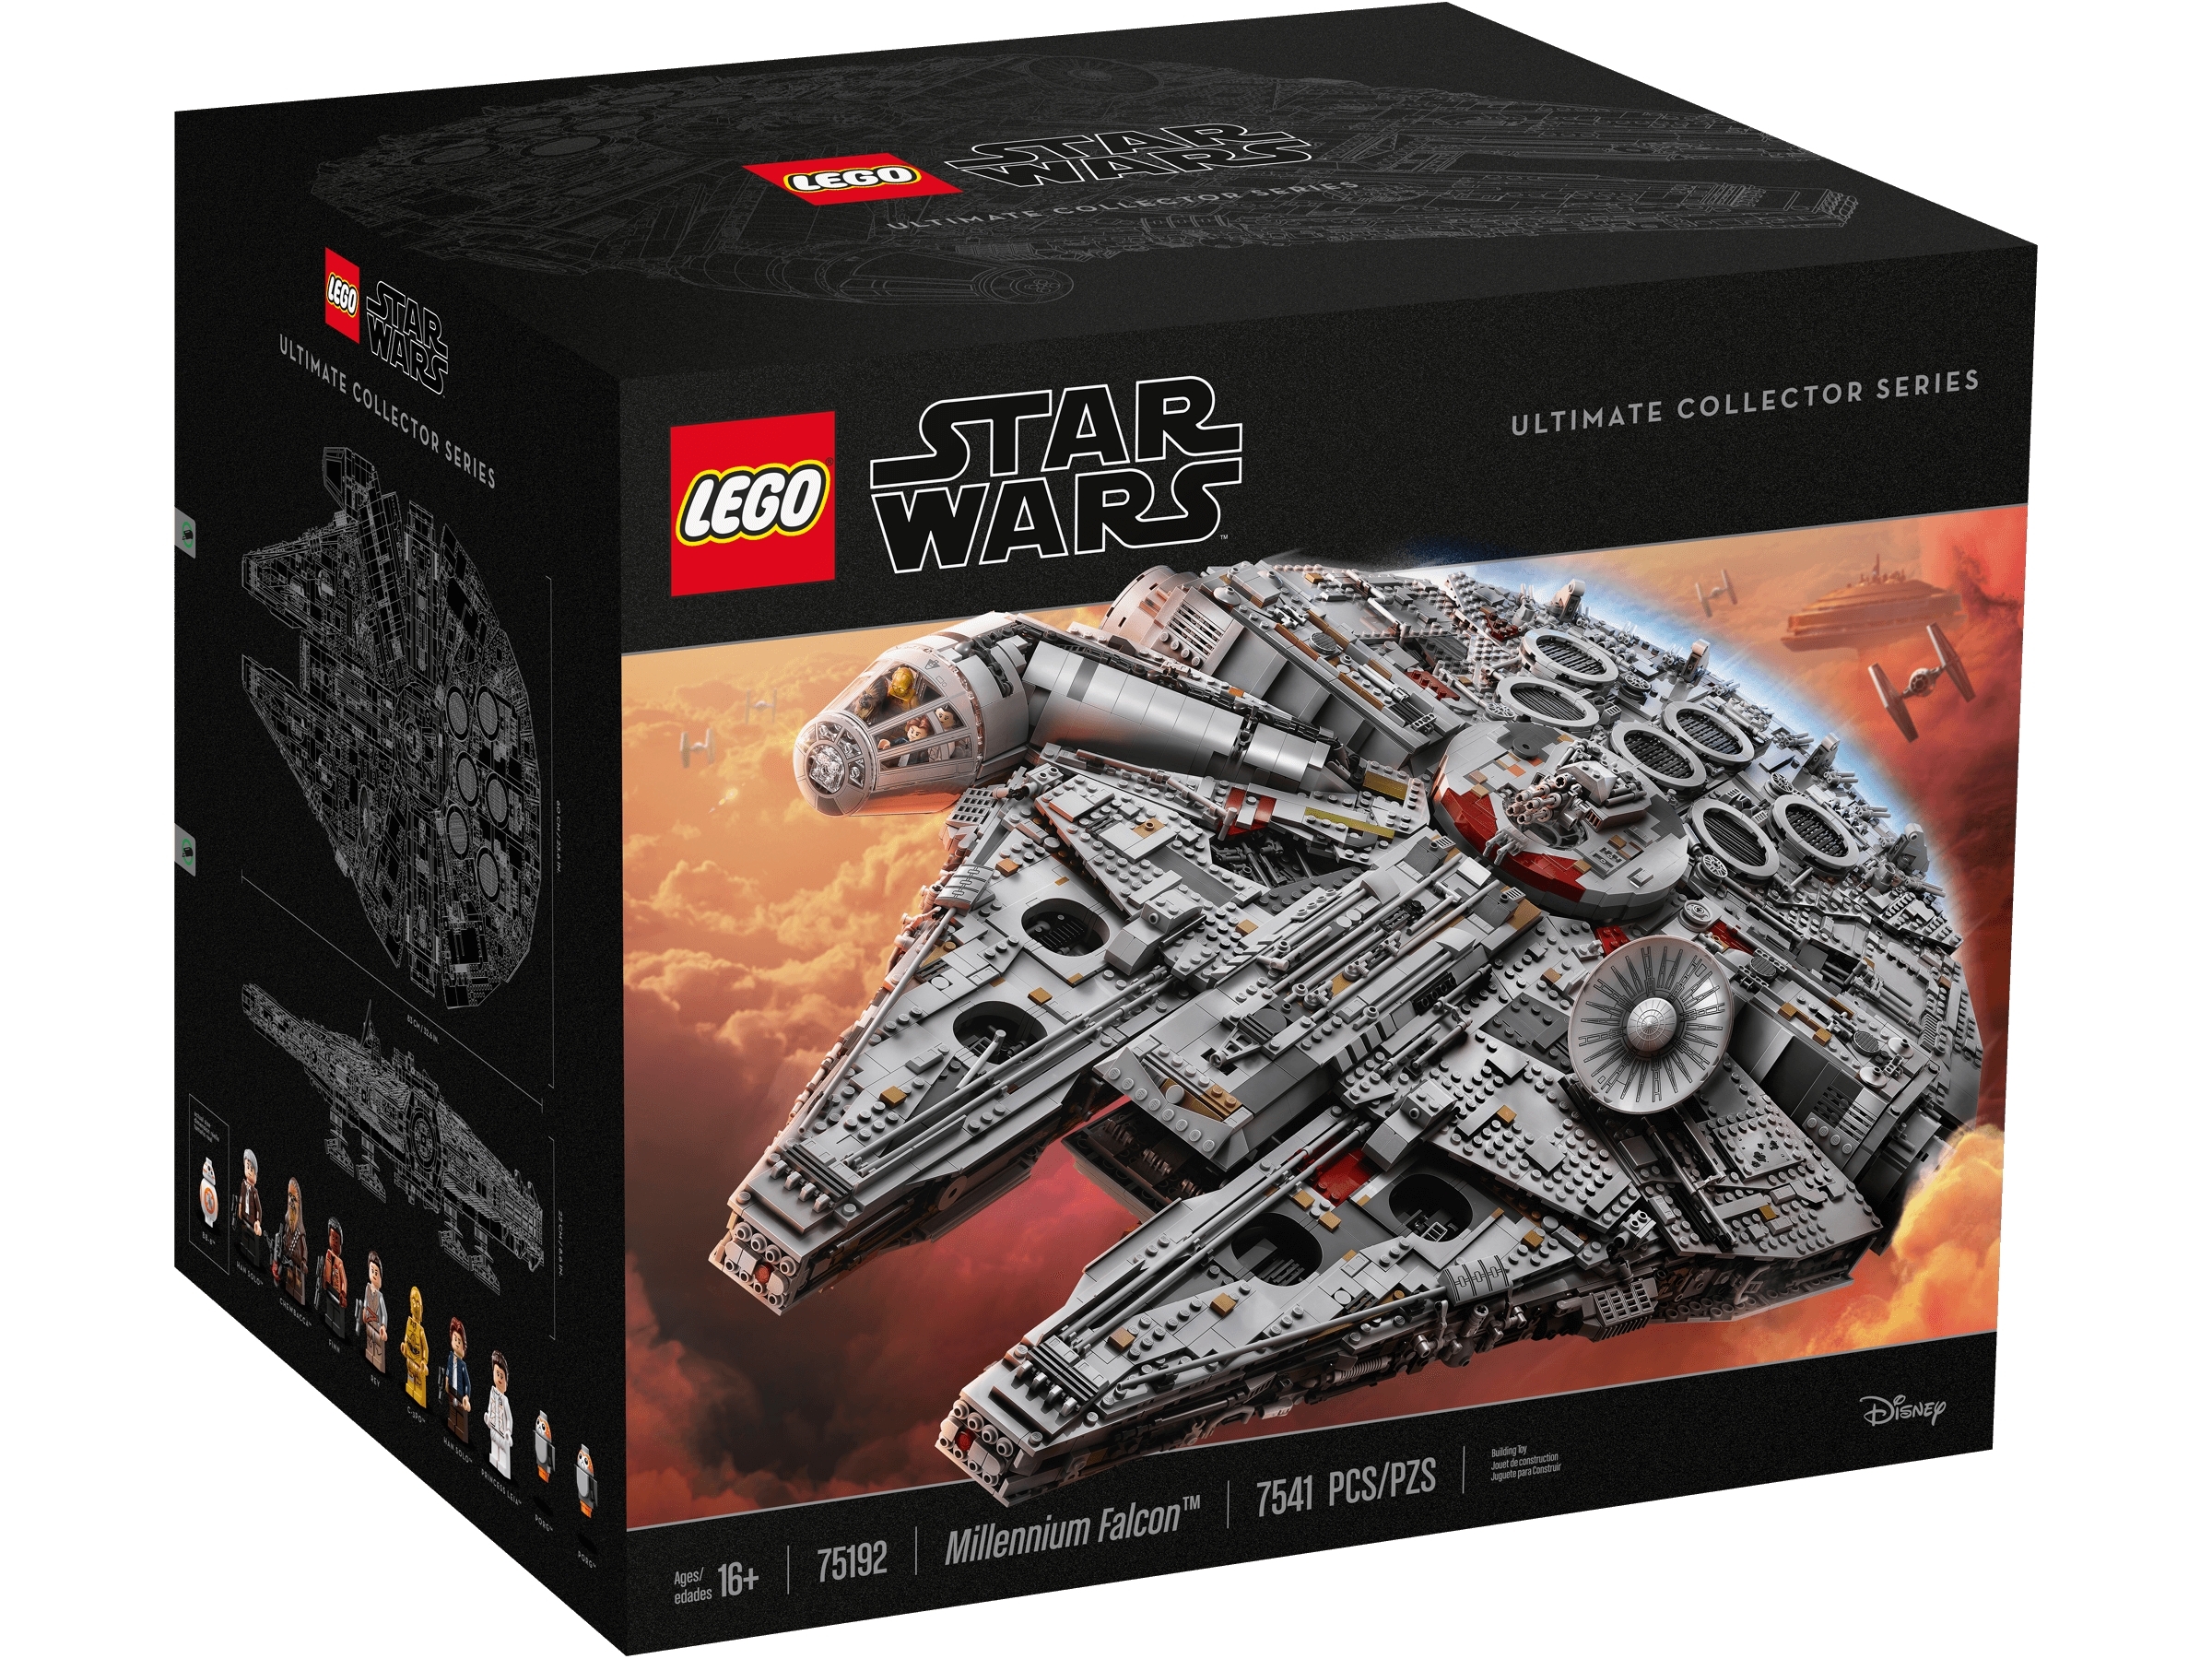 Best LEGO Star Wars Ultimate Collector's Series sets of all time